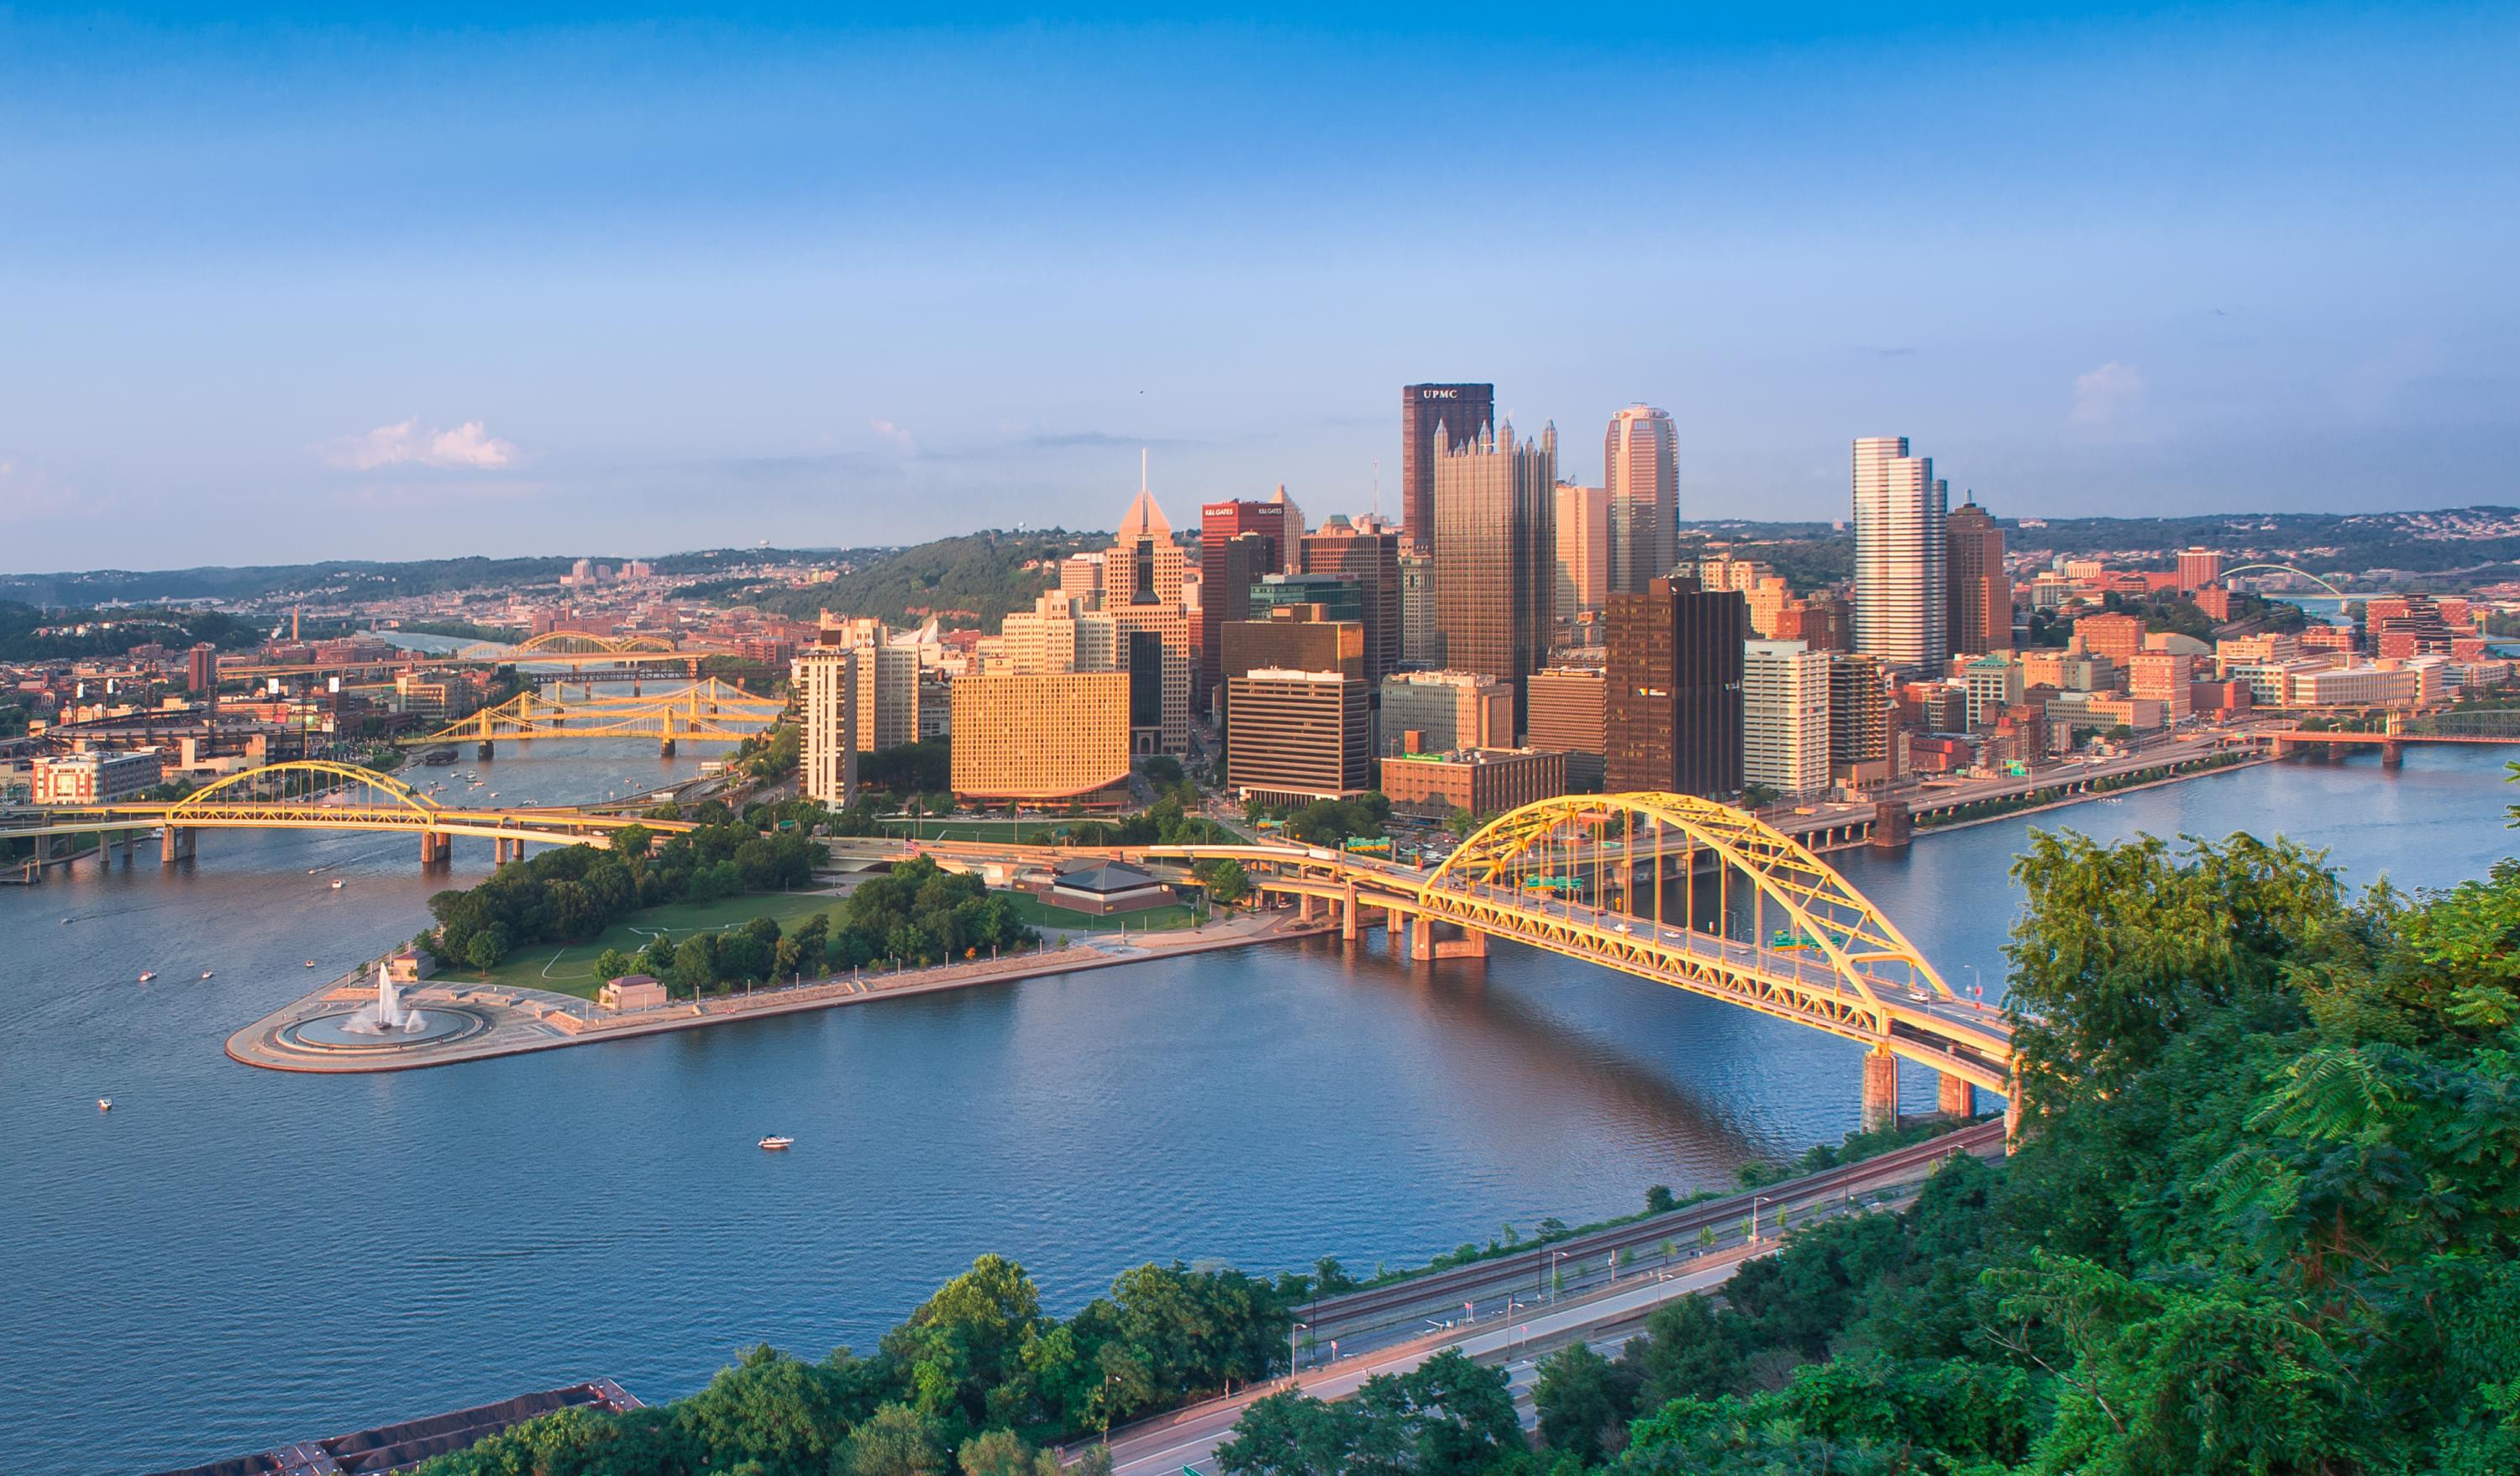 Aerial view of the city of Pittsburgh.